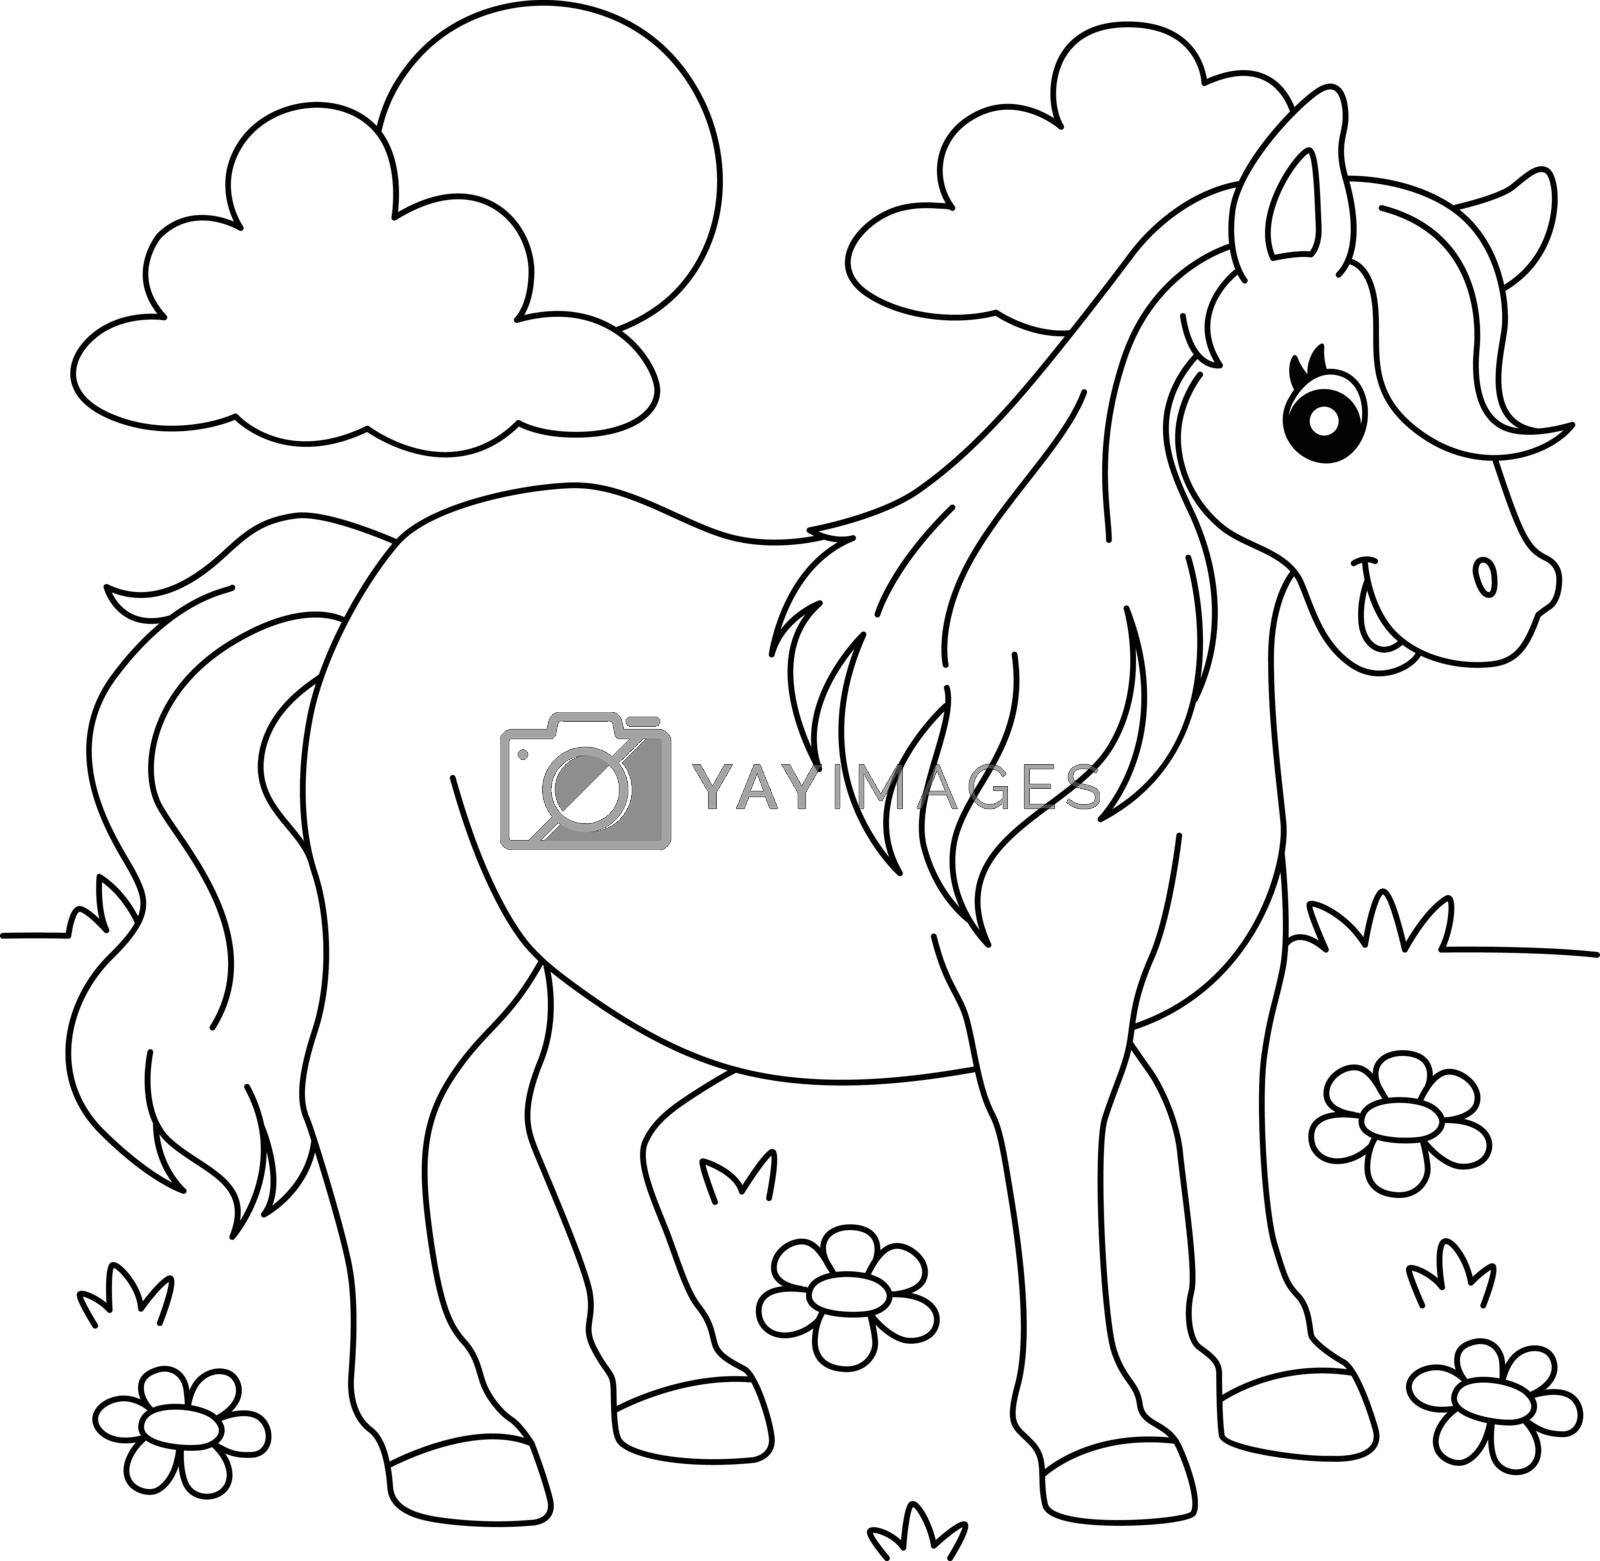 Royalty free image of Pony Animal Coloring Page for Kids by abbydesign